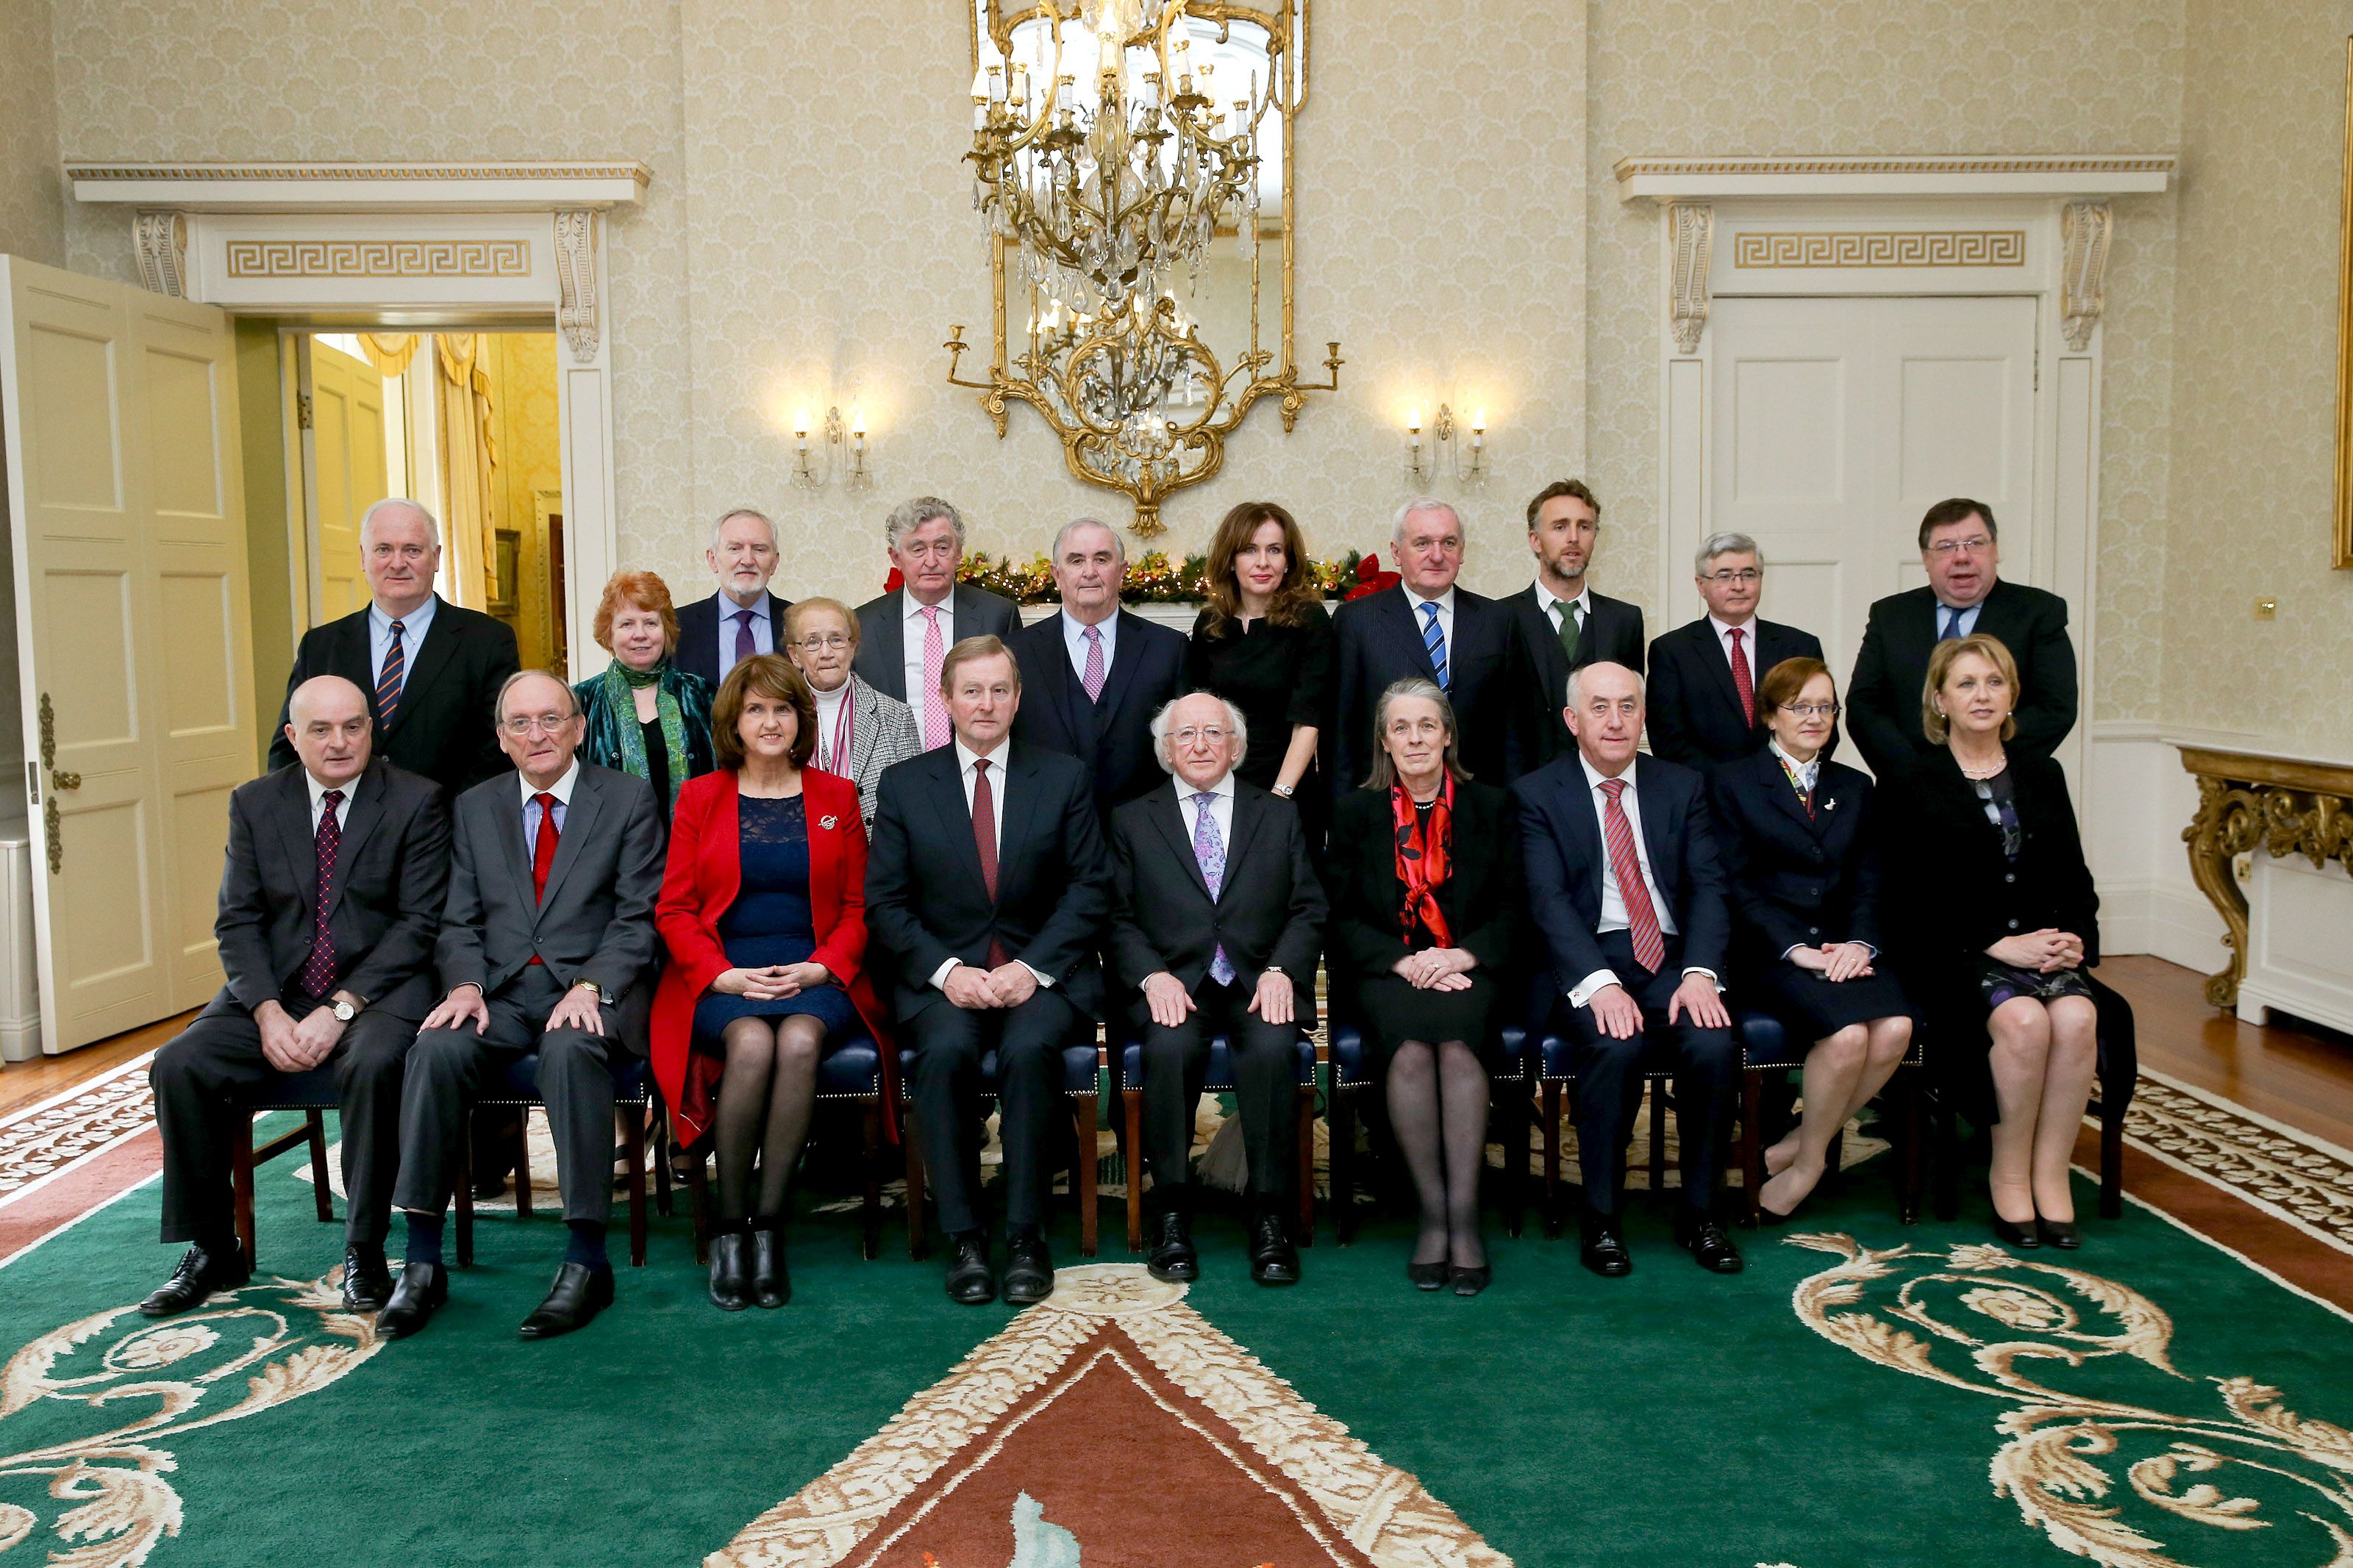 Council of state photo